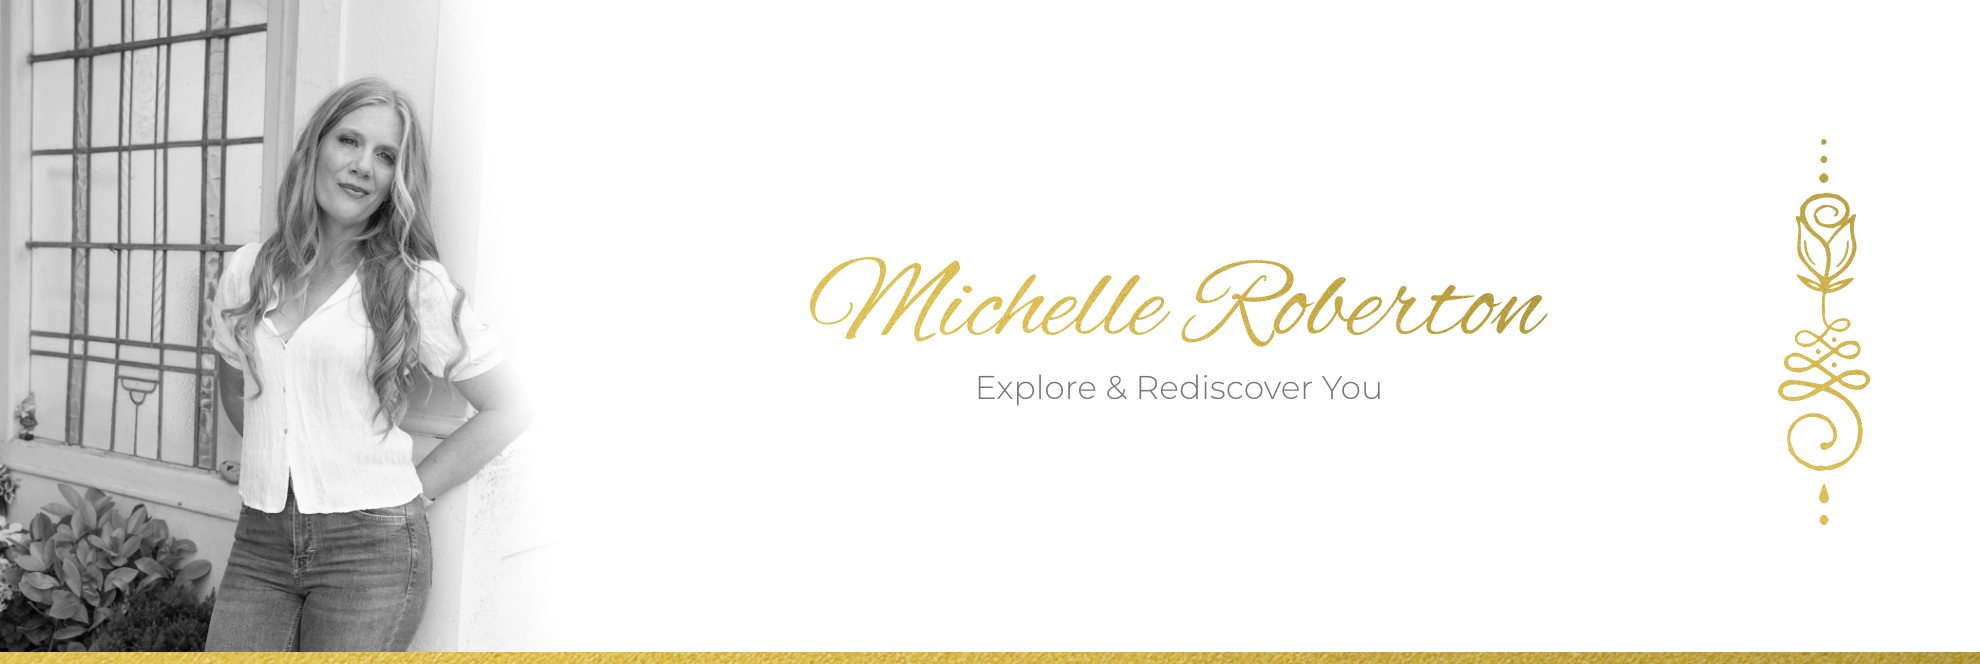 Explore and rediscover you banner